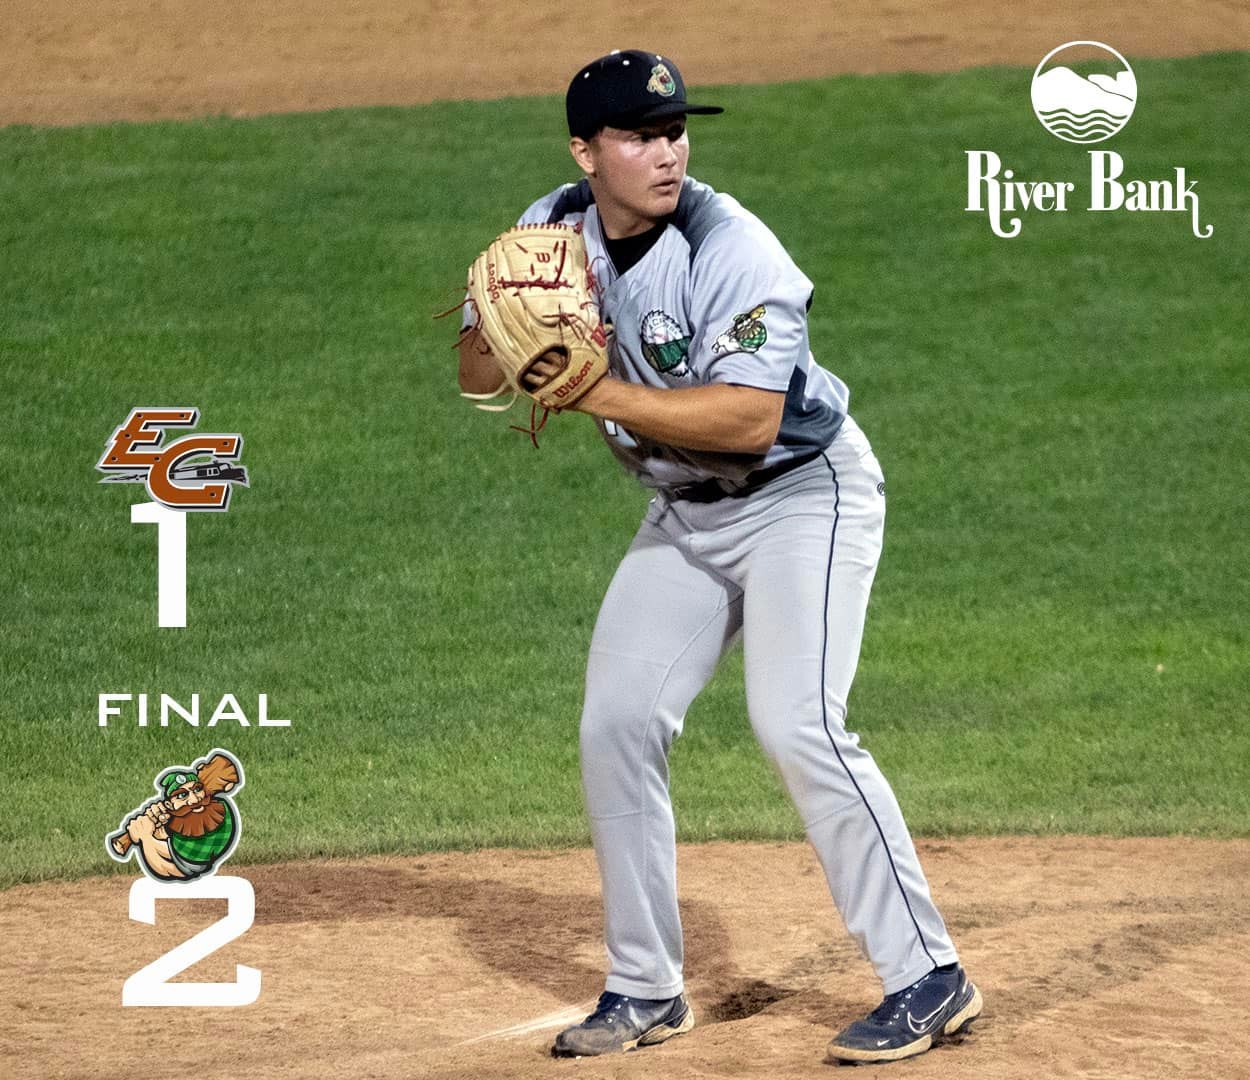 La Crosse Loggers get 2-1 playoff win in 9th, head to Copeland on Monday to finish series